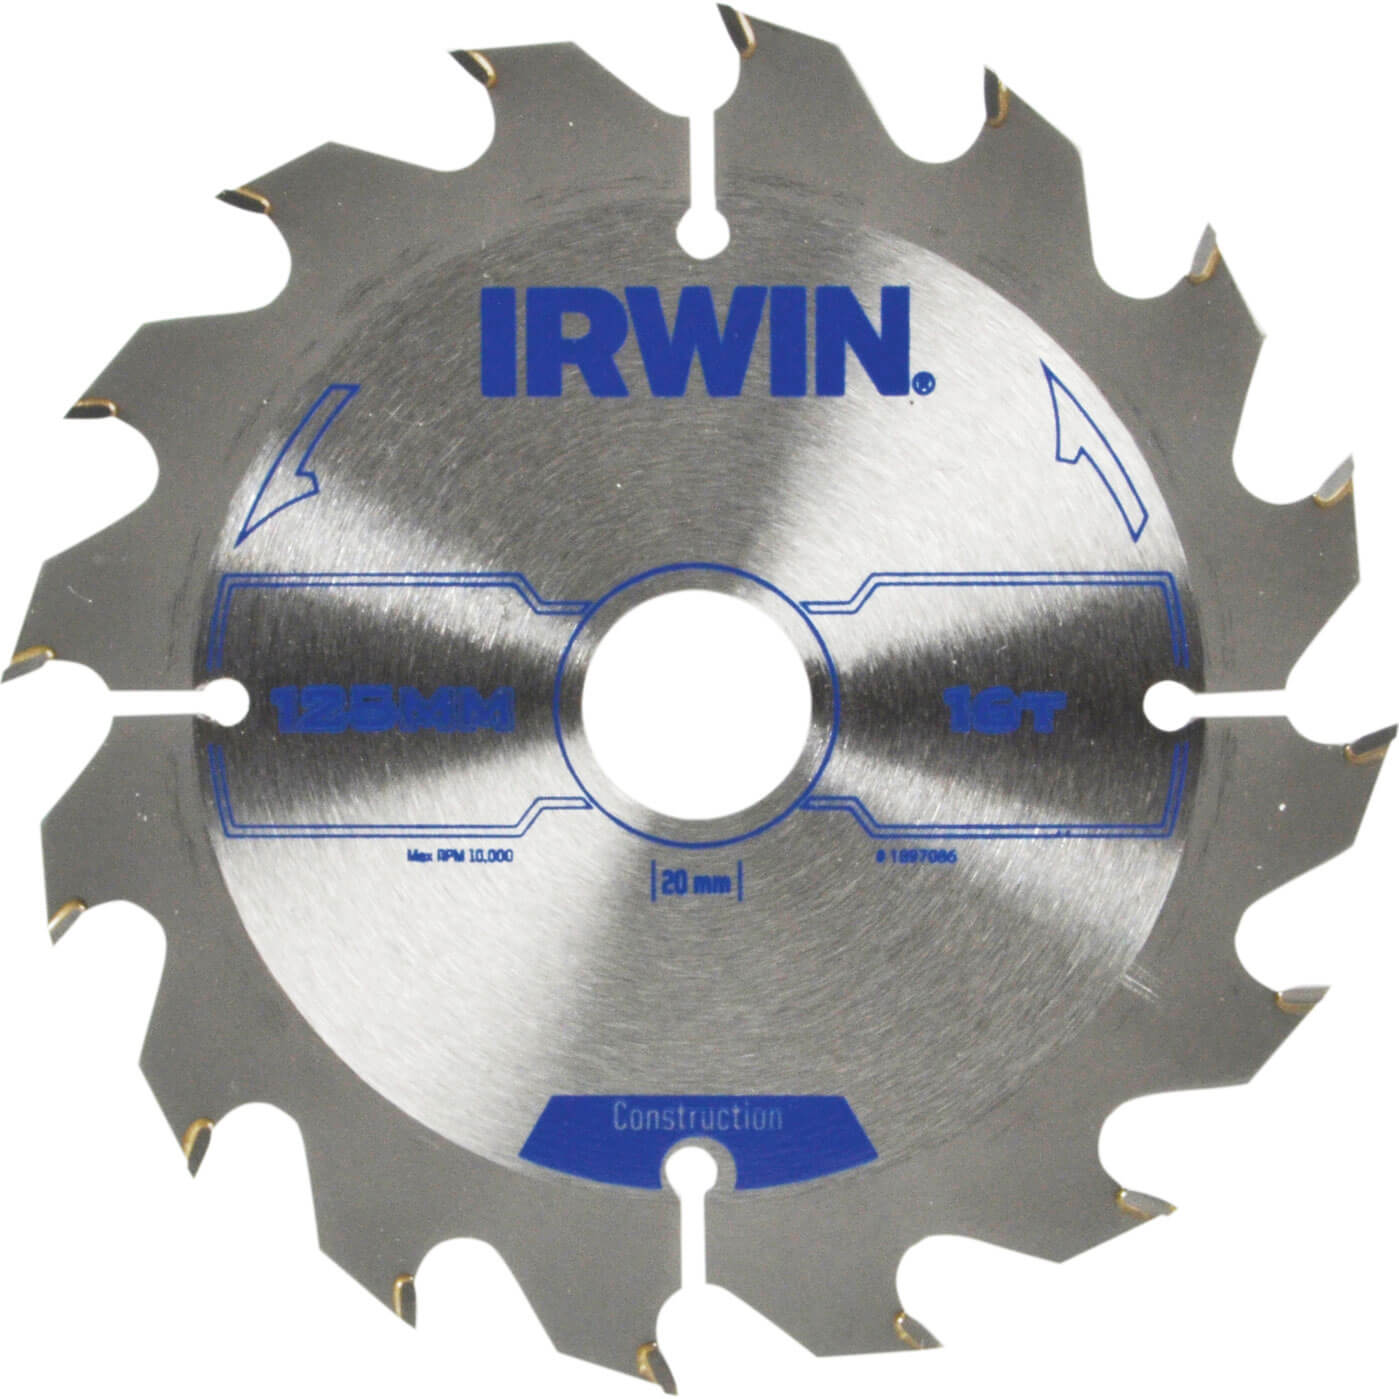 Photo of Irwin Atb Construction Circular Saw Blade 125mm 16t 20mm